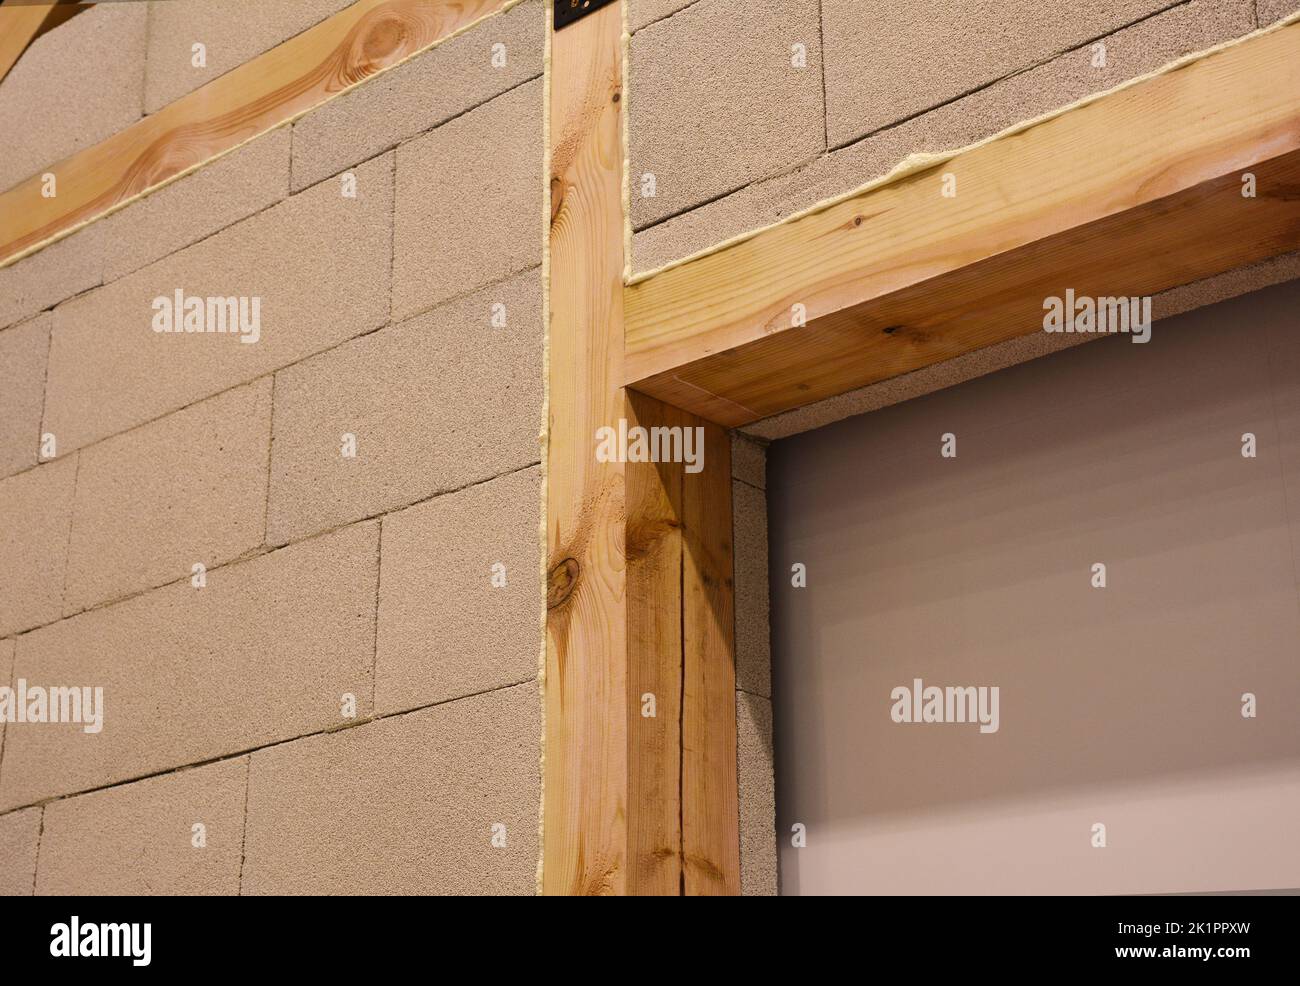 Interior house wall construction with aerated concrete blocks with wooden beams, wooden lintels and insulation foam. Stock Photo